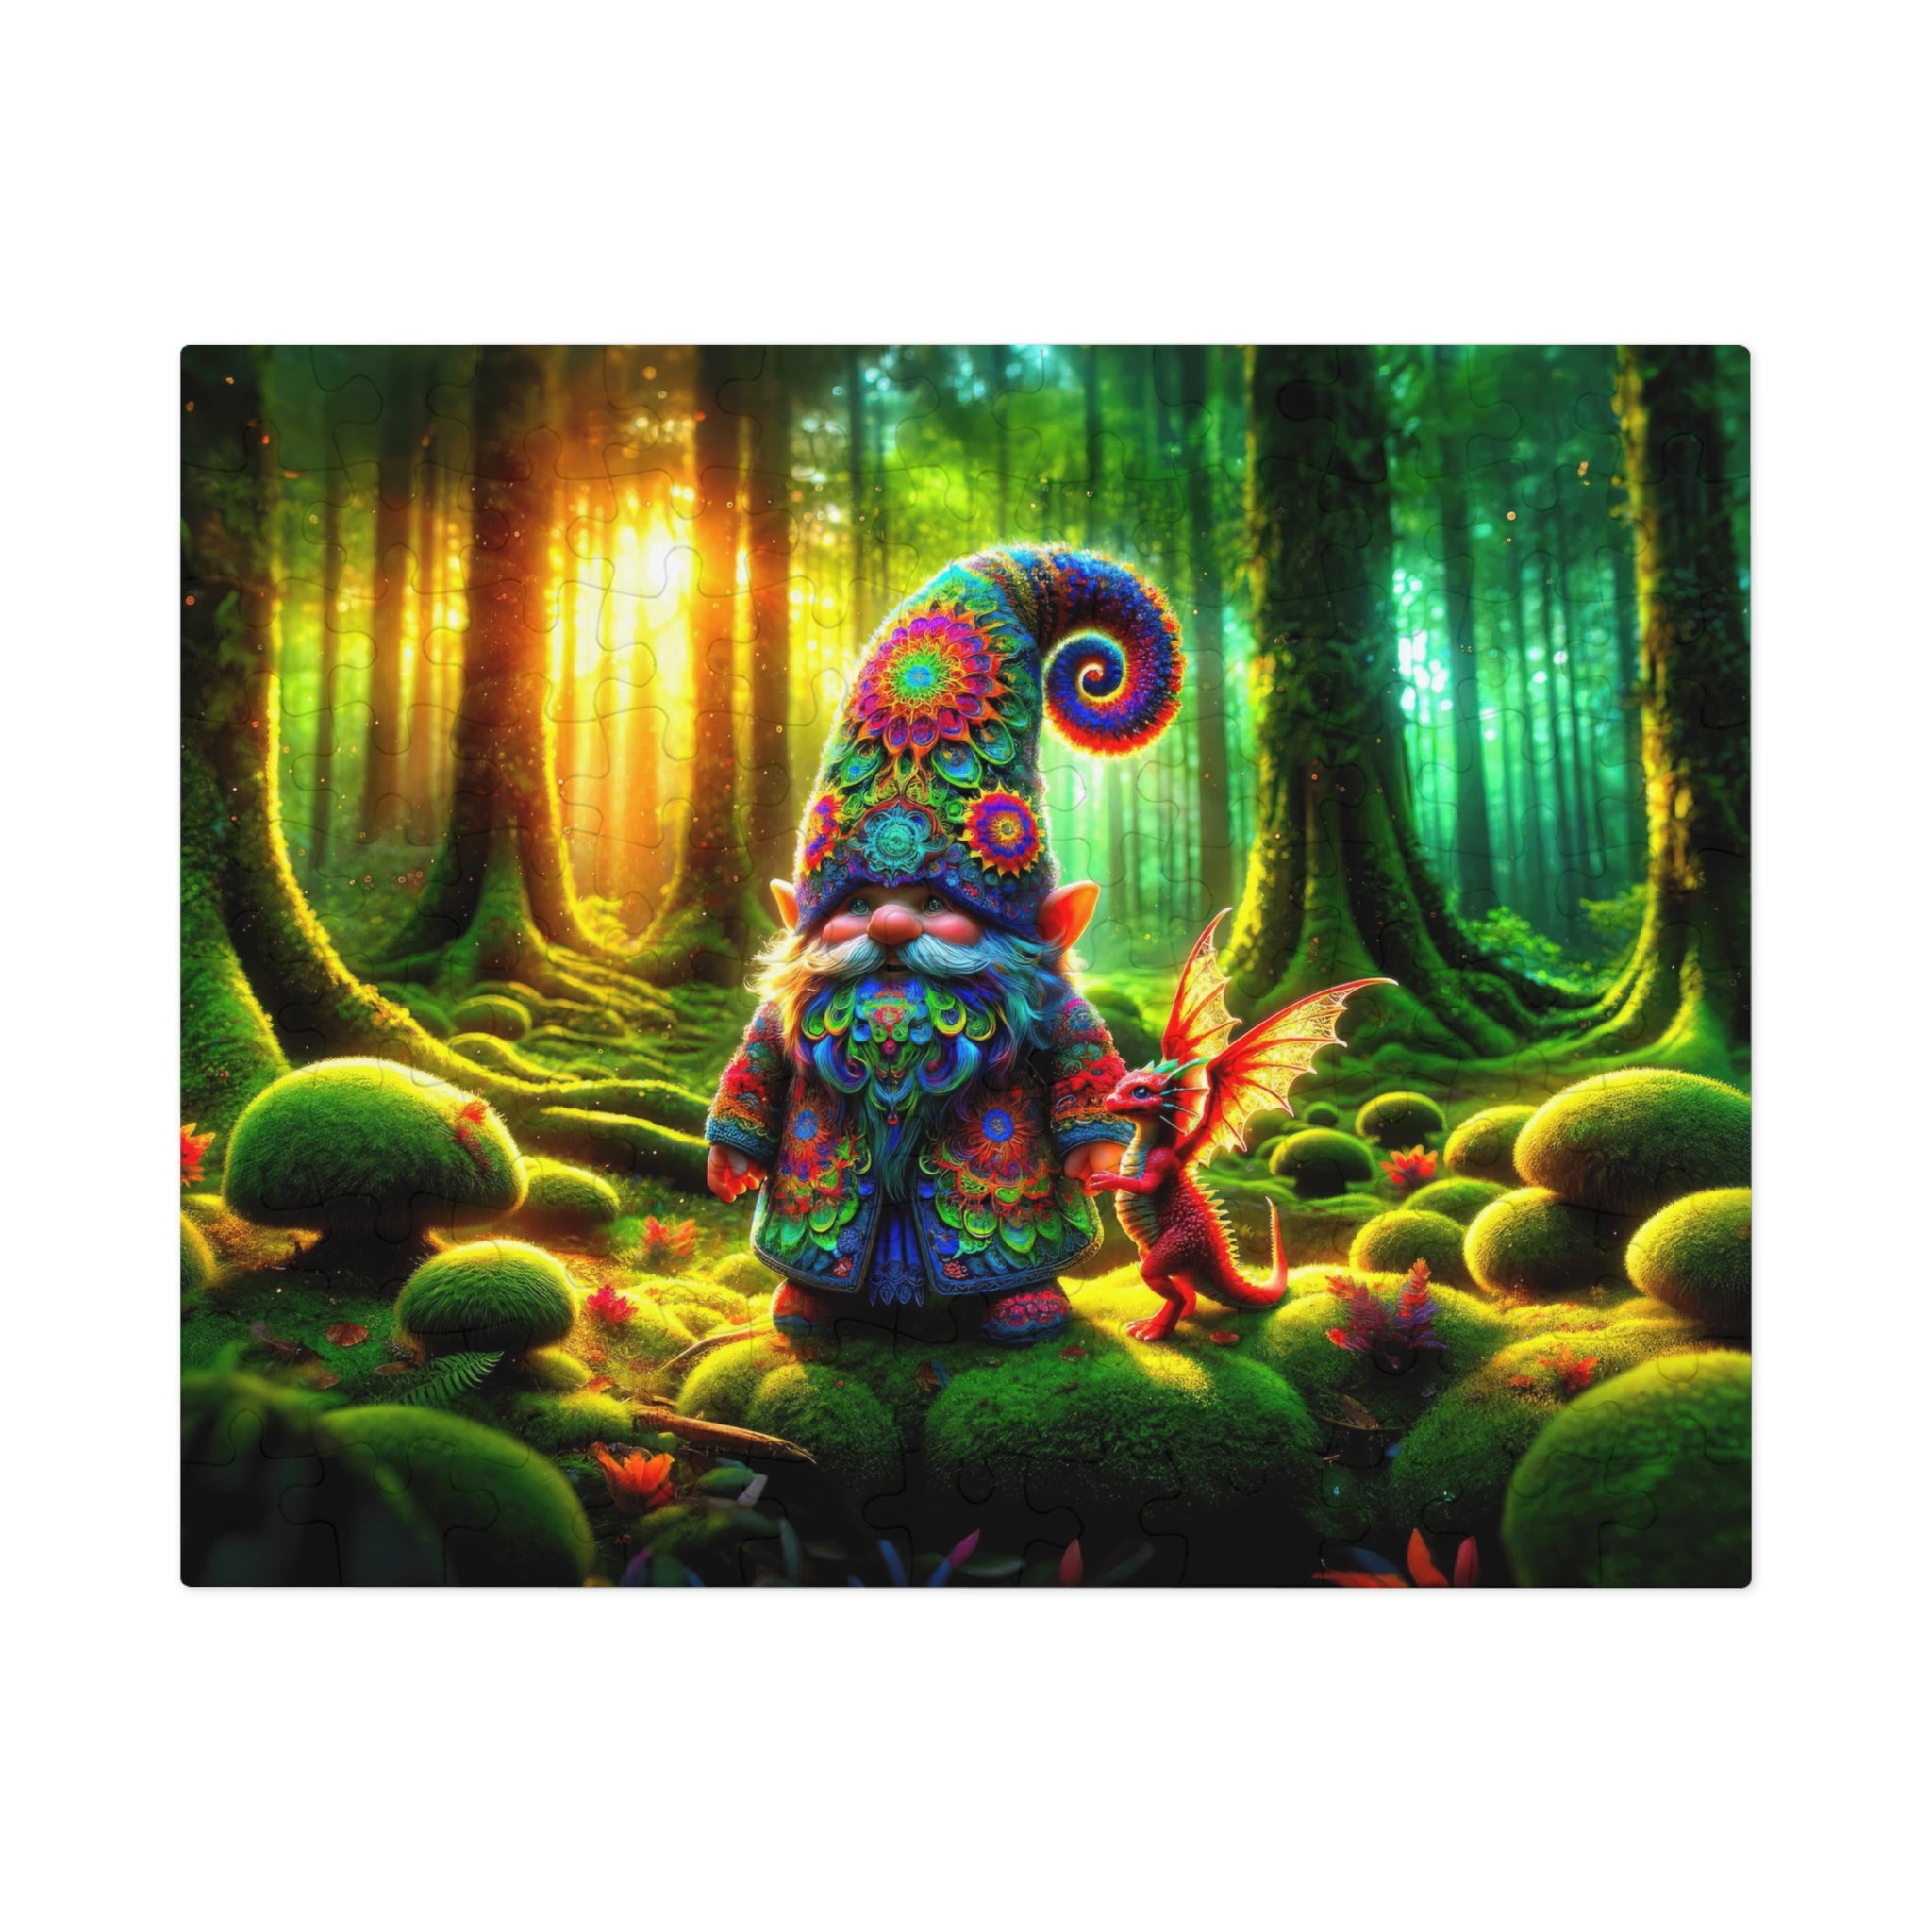 The Gnome's Morning in Enchanted Woods Jigsaw Puzzle